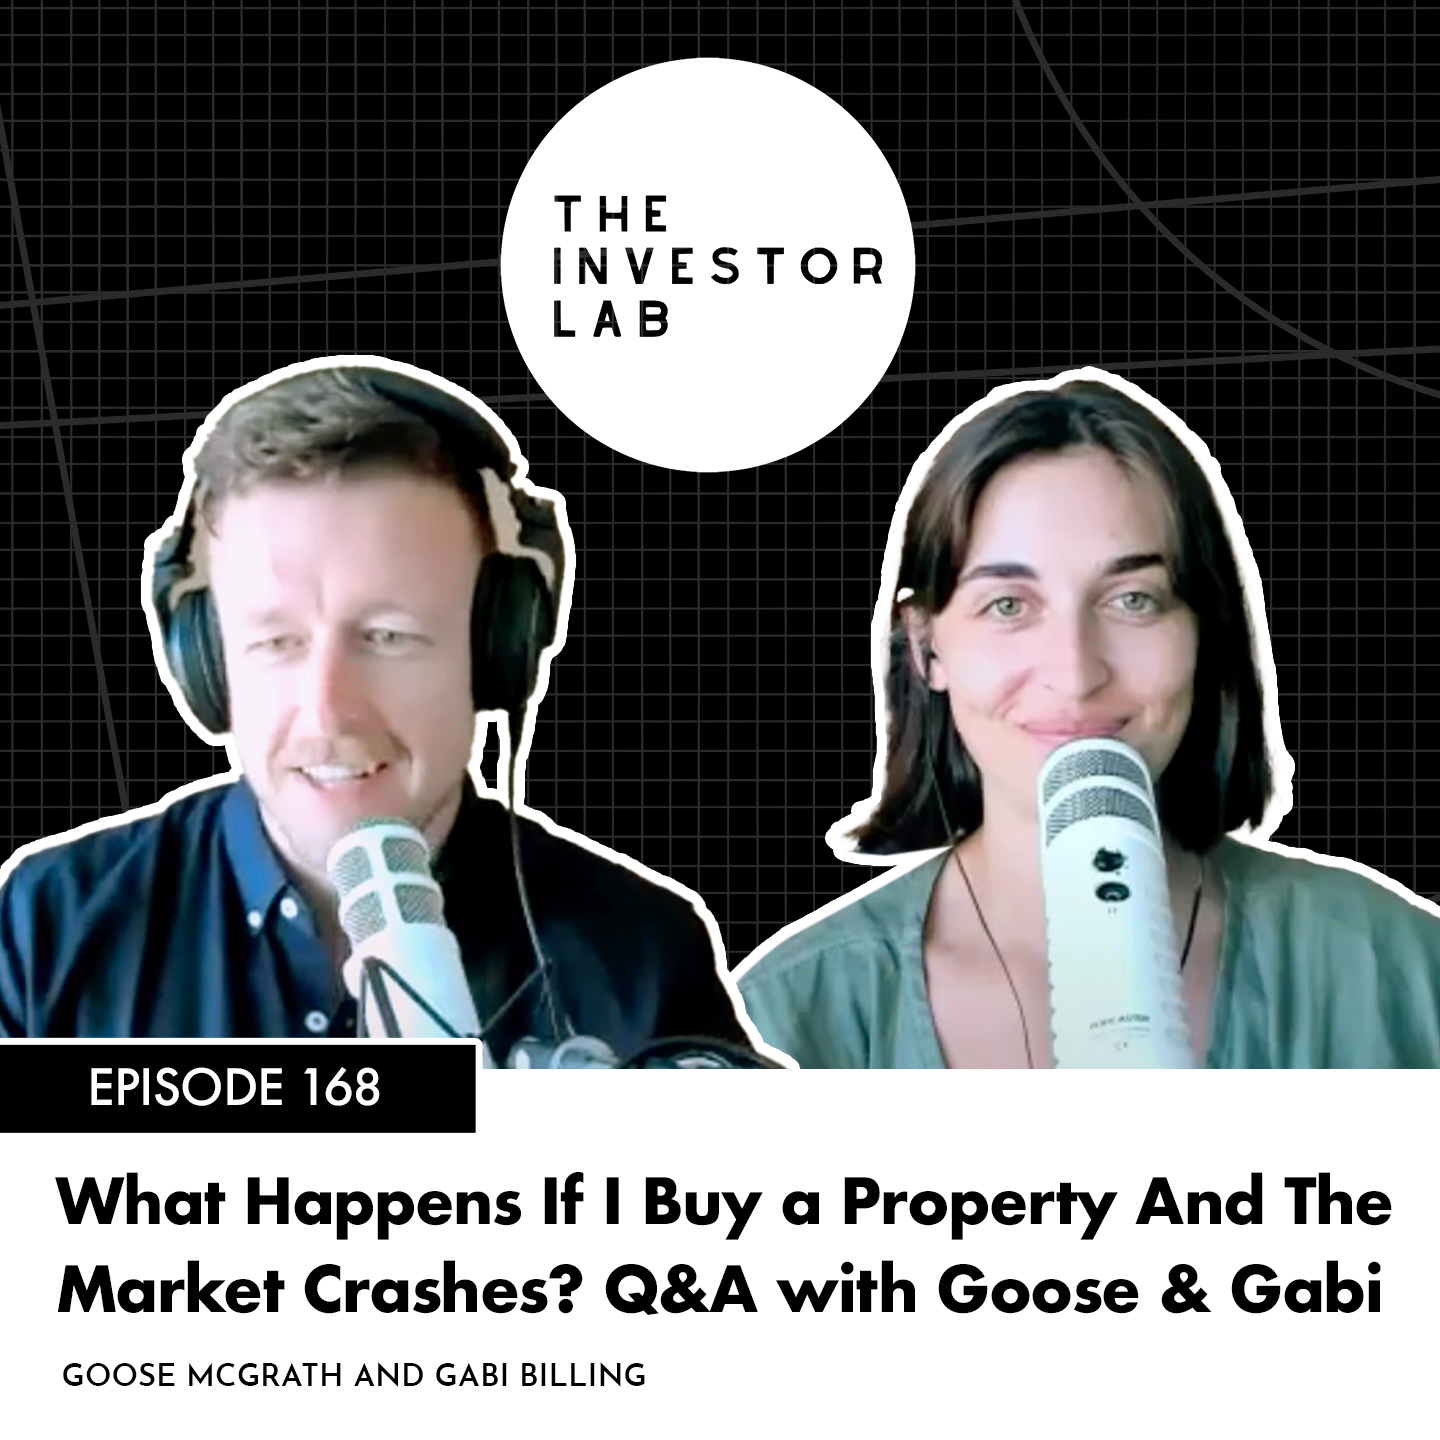 What Happens If I Buy a Property And The Market Crashes? Q&A with Goose & Gabi